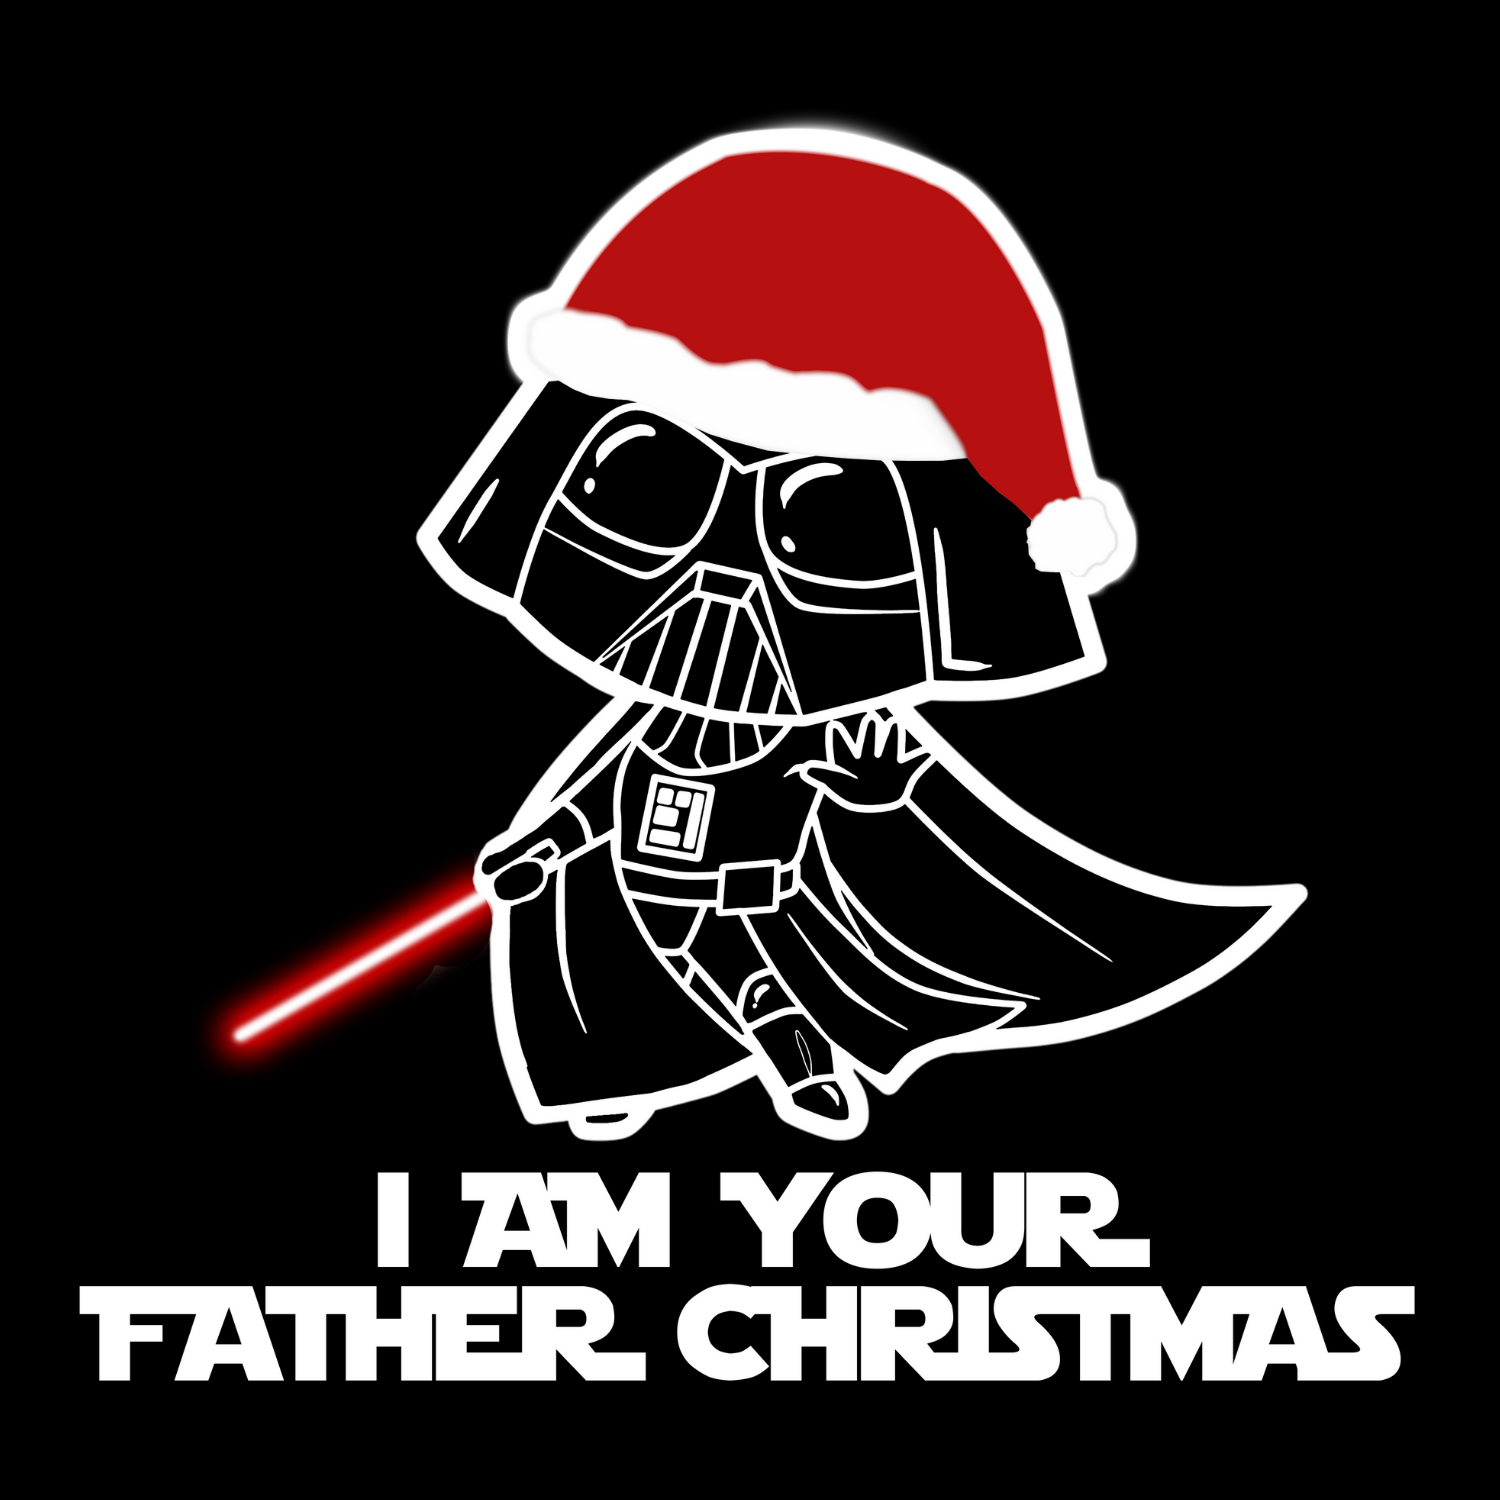 I am Your Father Christmas - Sweater